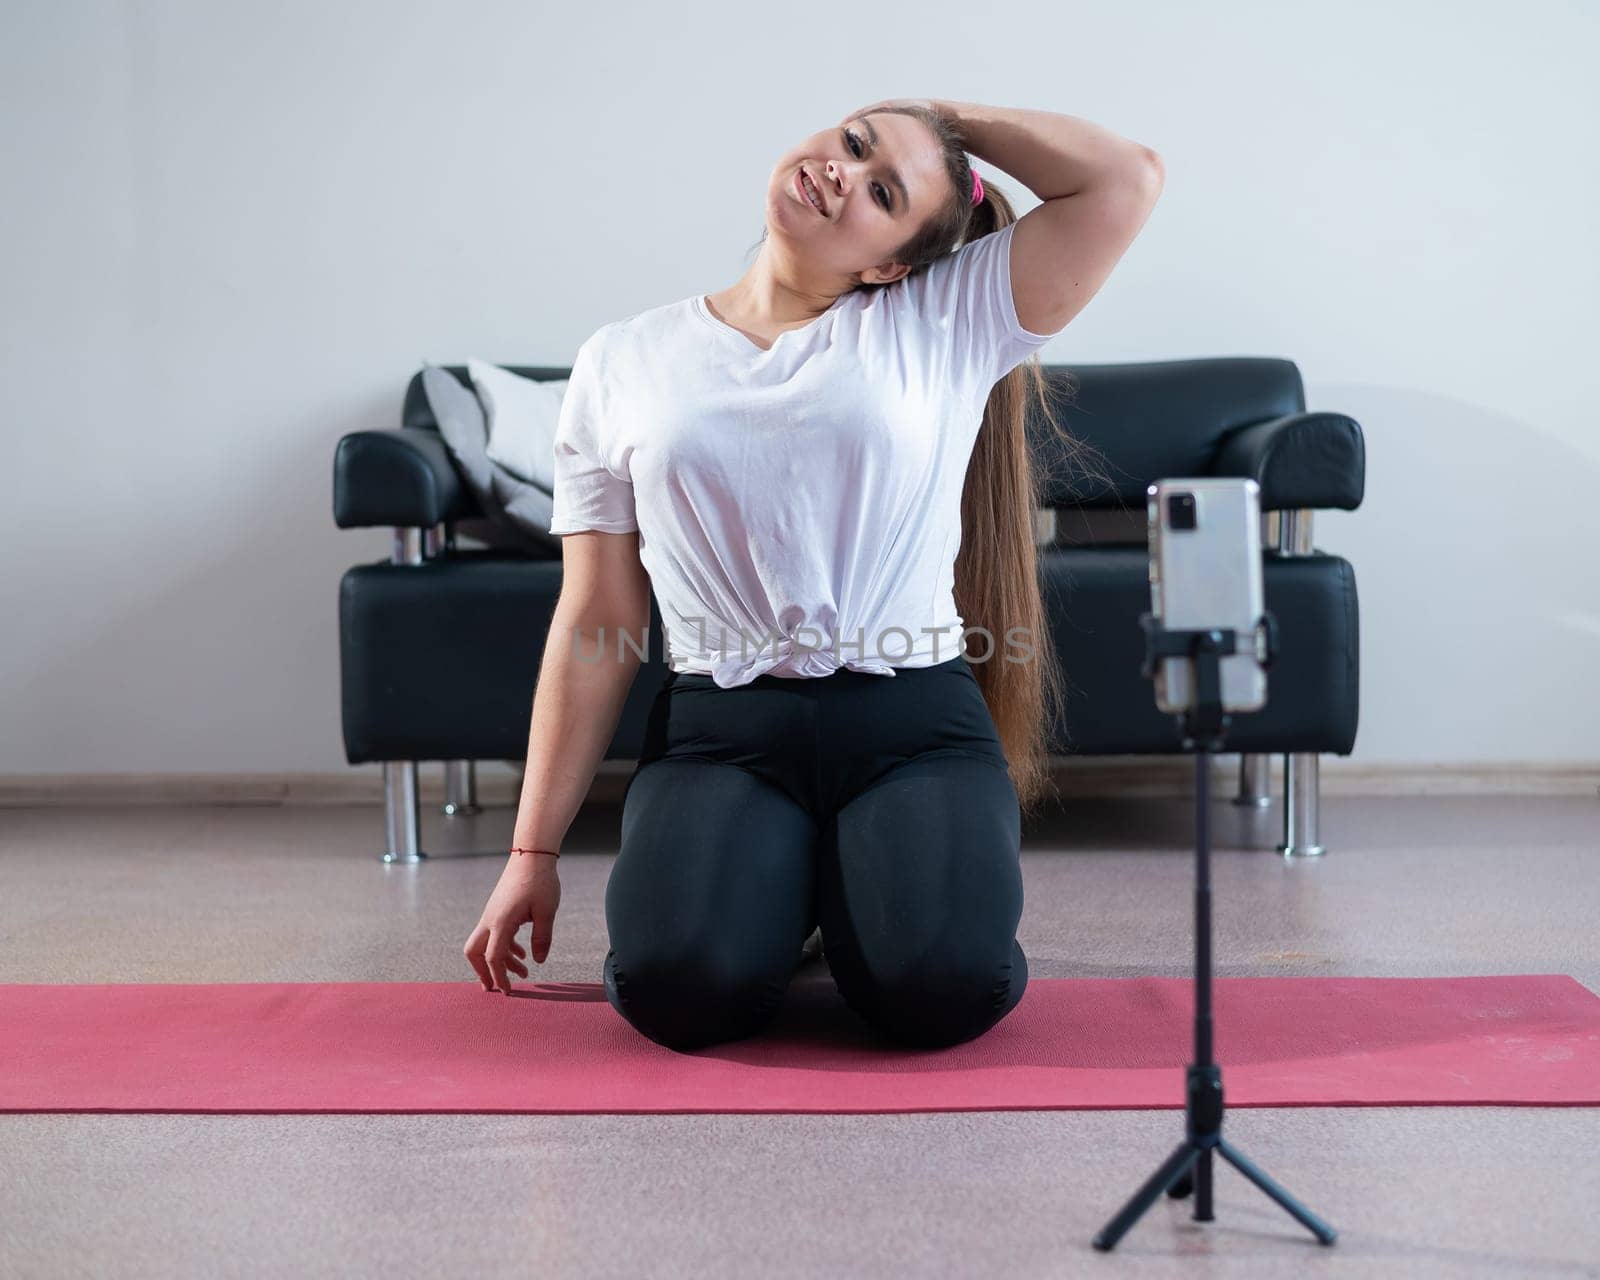 Charming plus size girl in sportswear is doing fitness exercises with an online trainer on the phone against a white background.